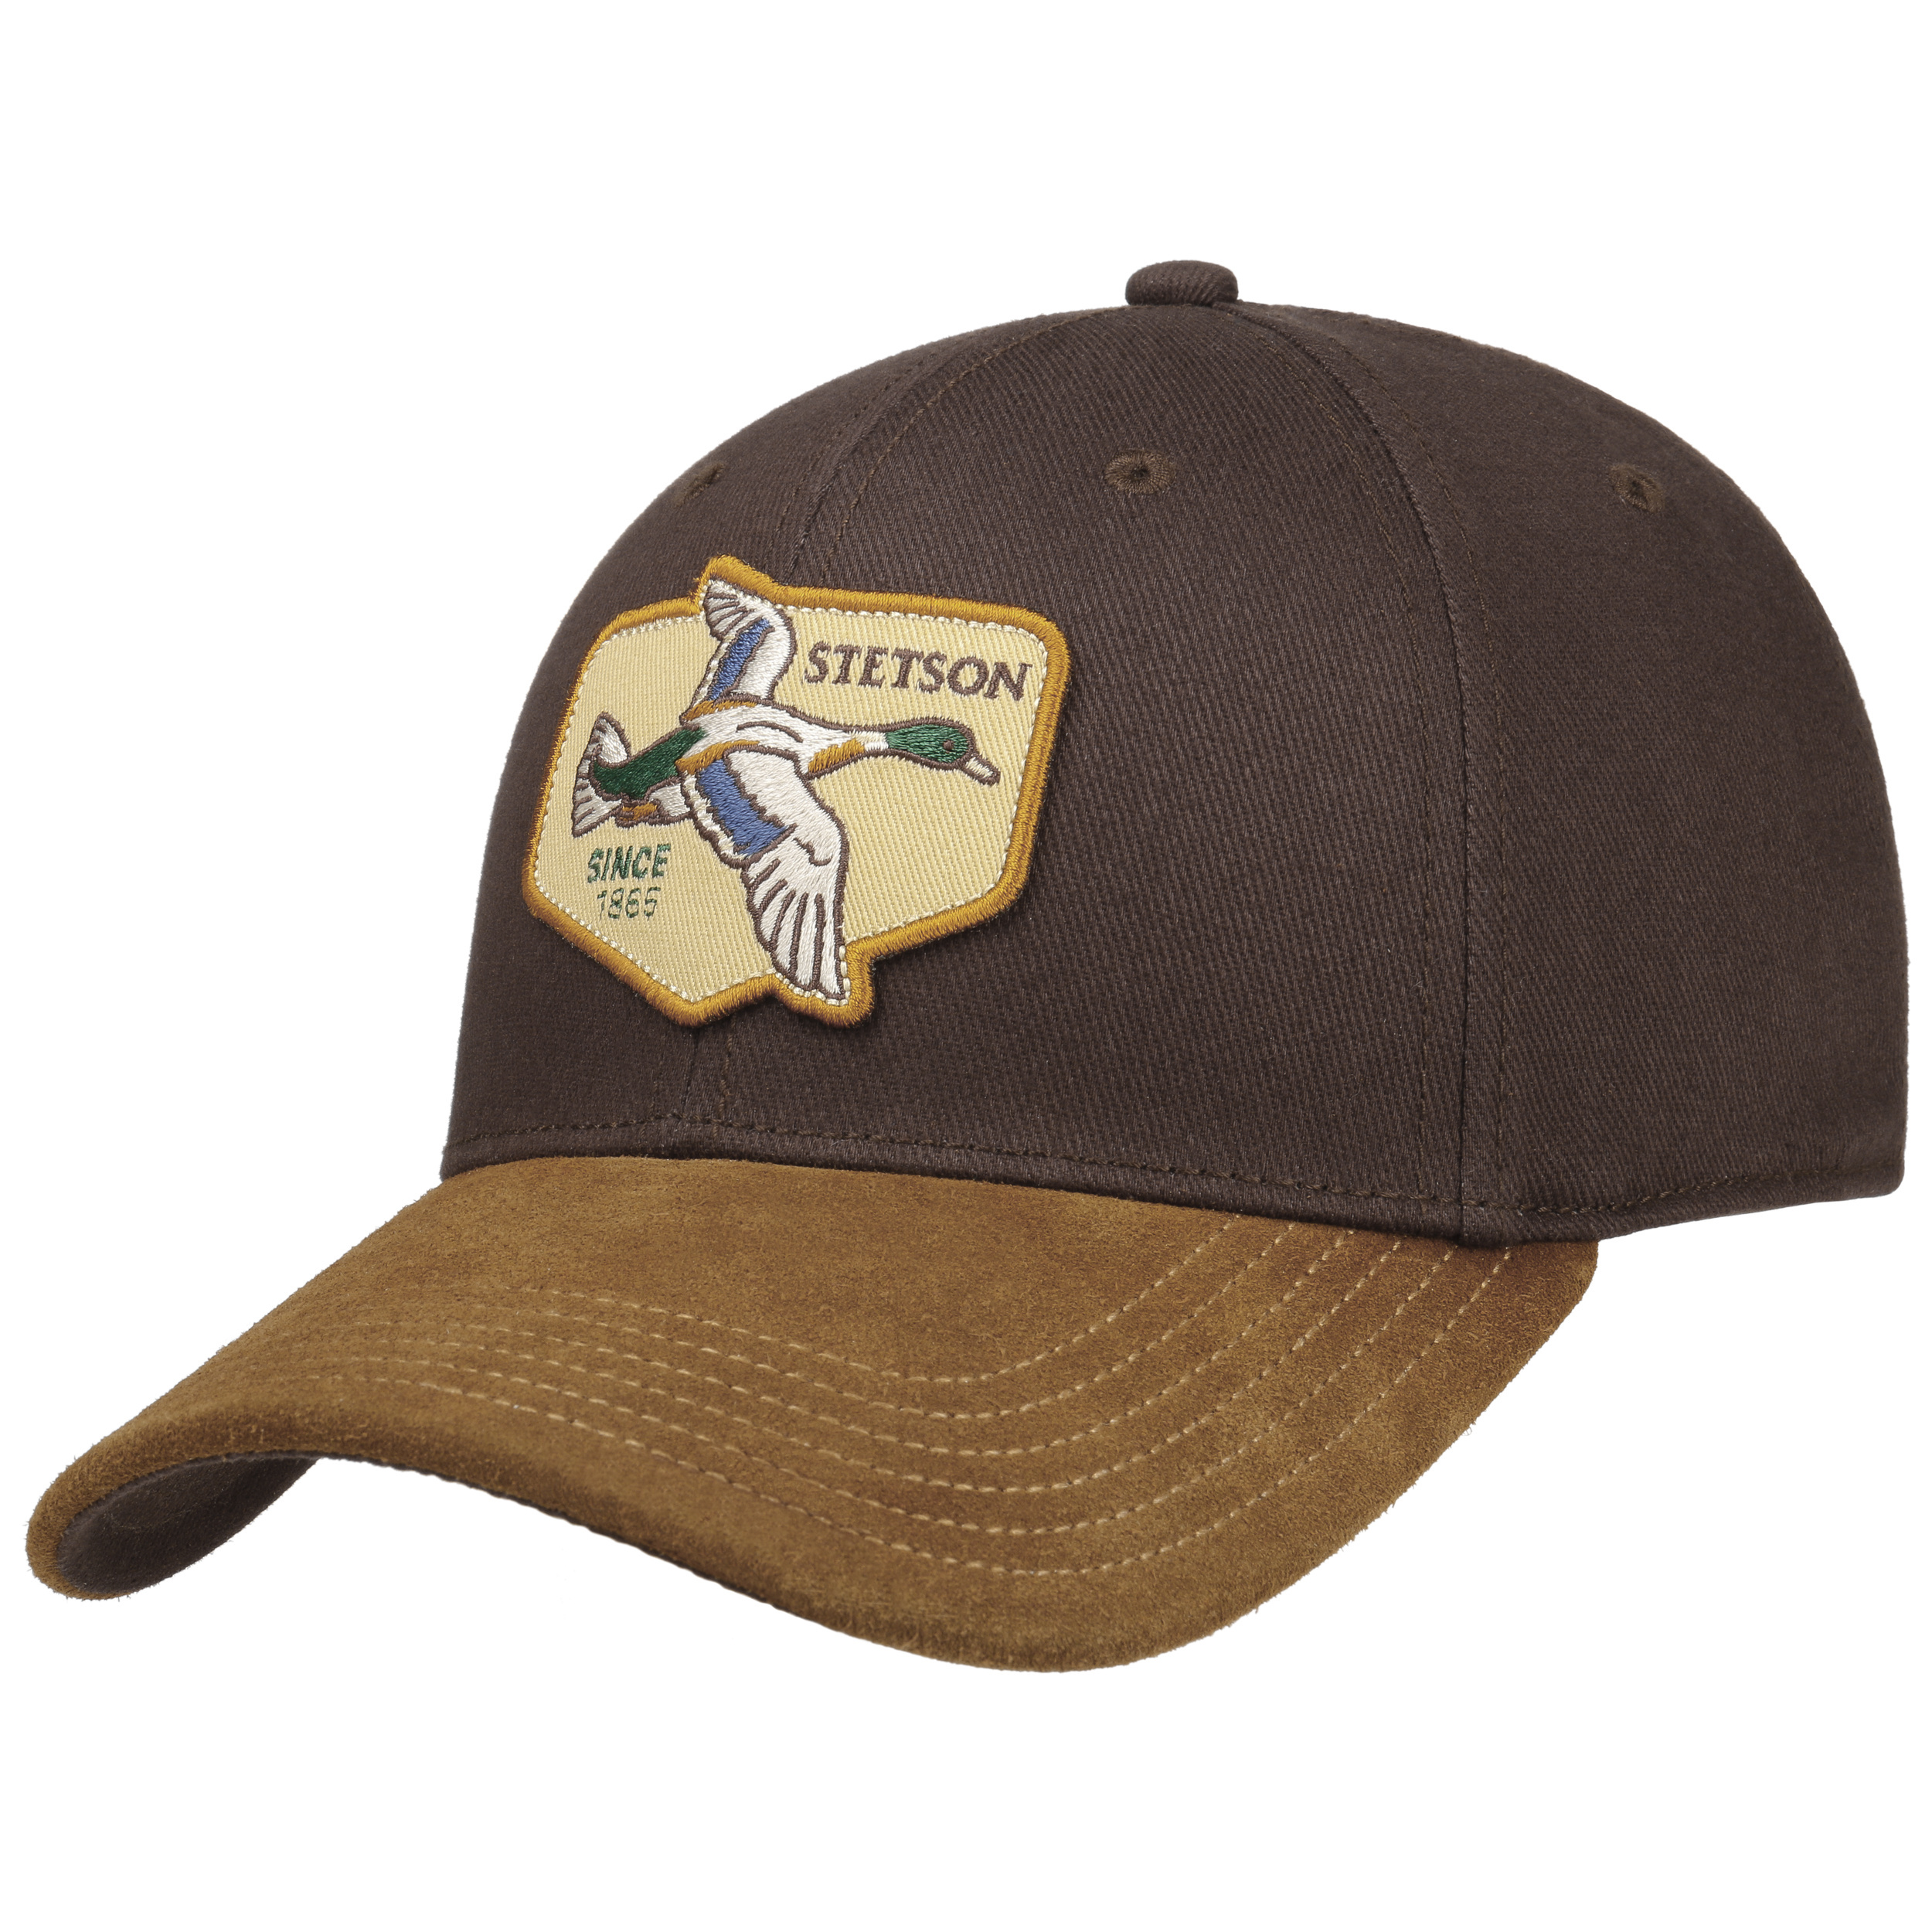 Duck Cap with Leather Visor by Stetson